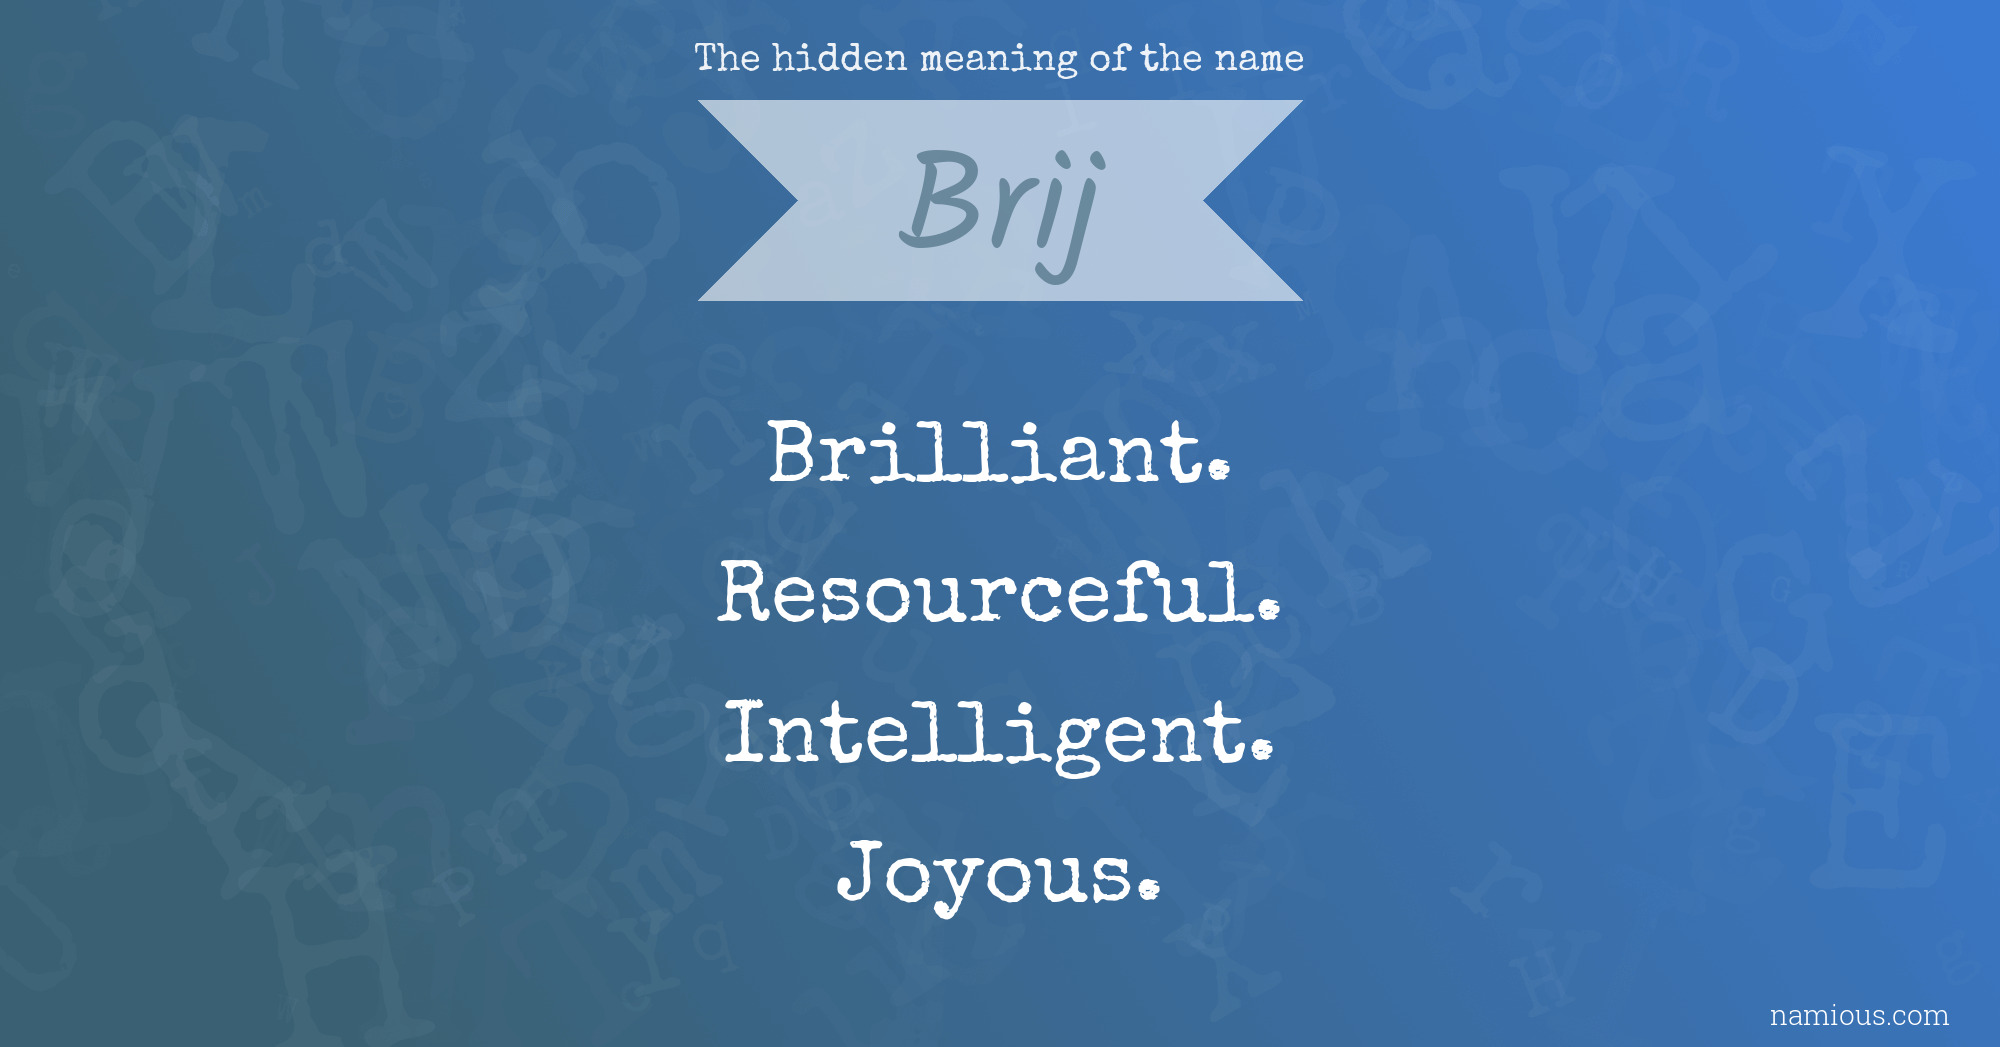 The hidden meaning of the name Brij